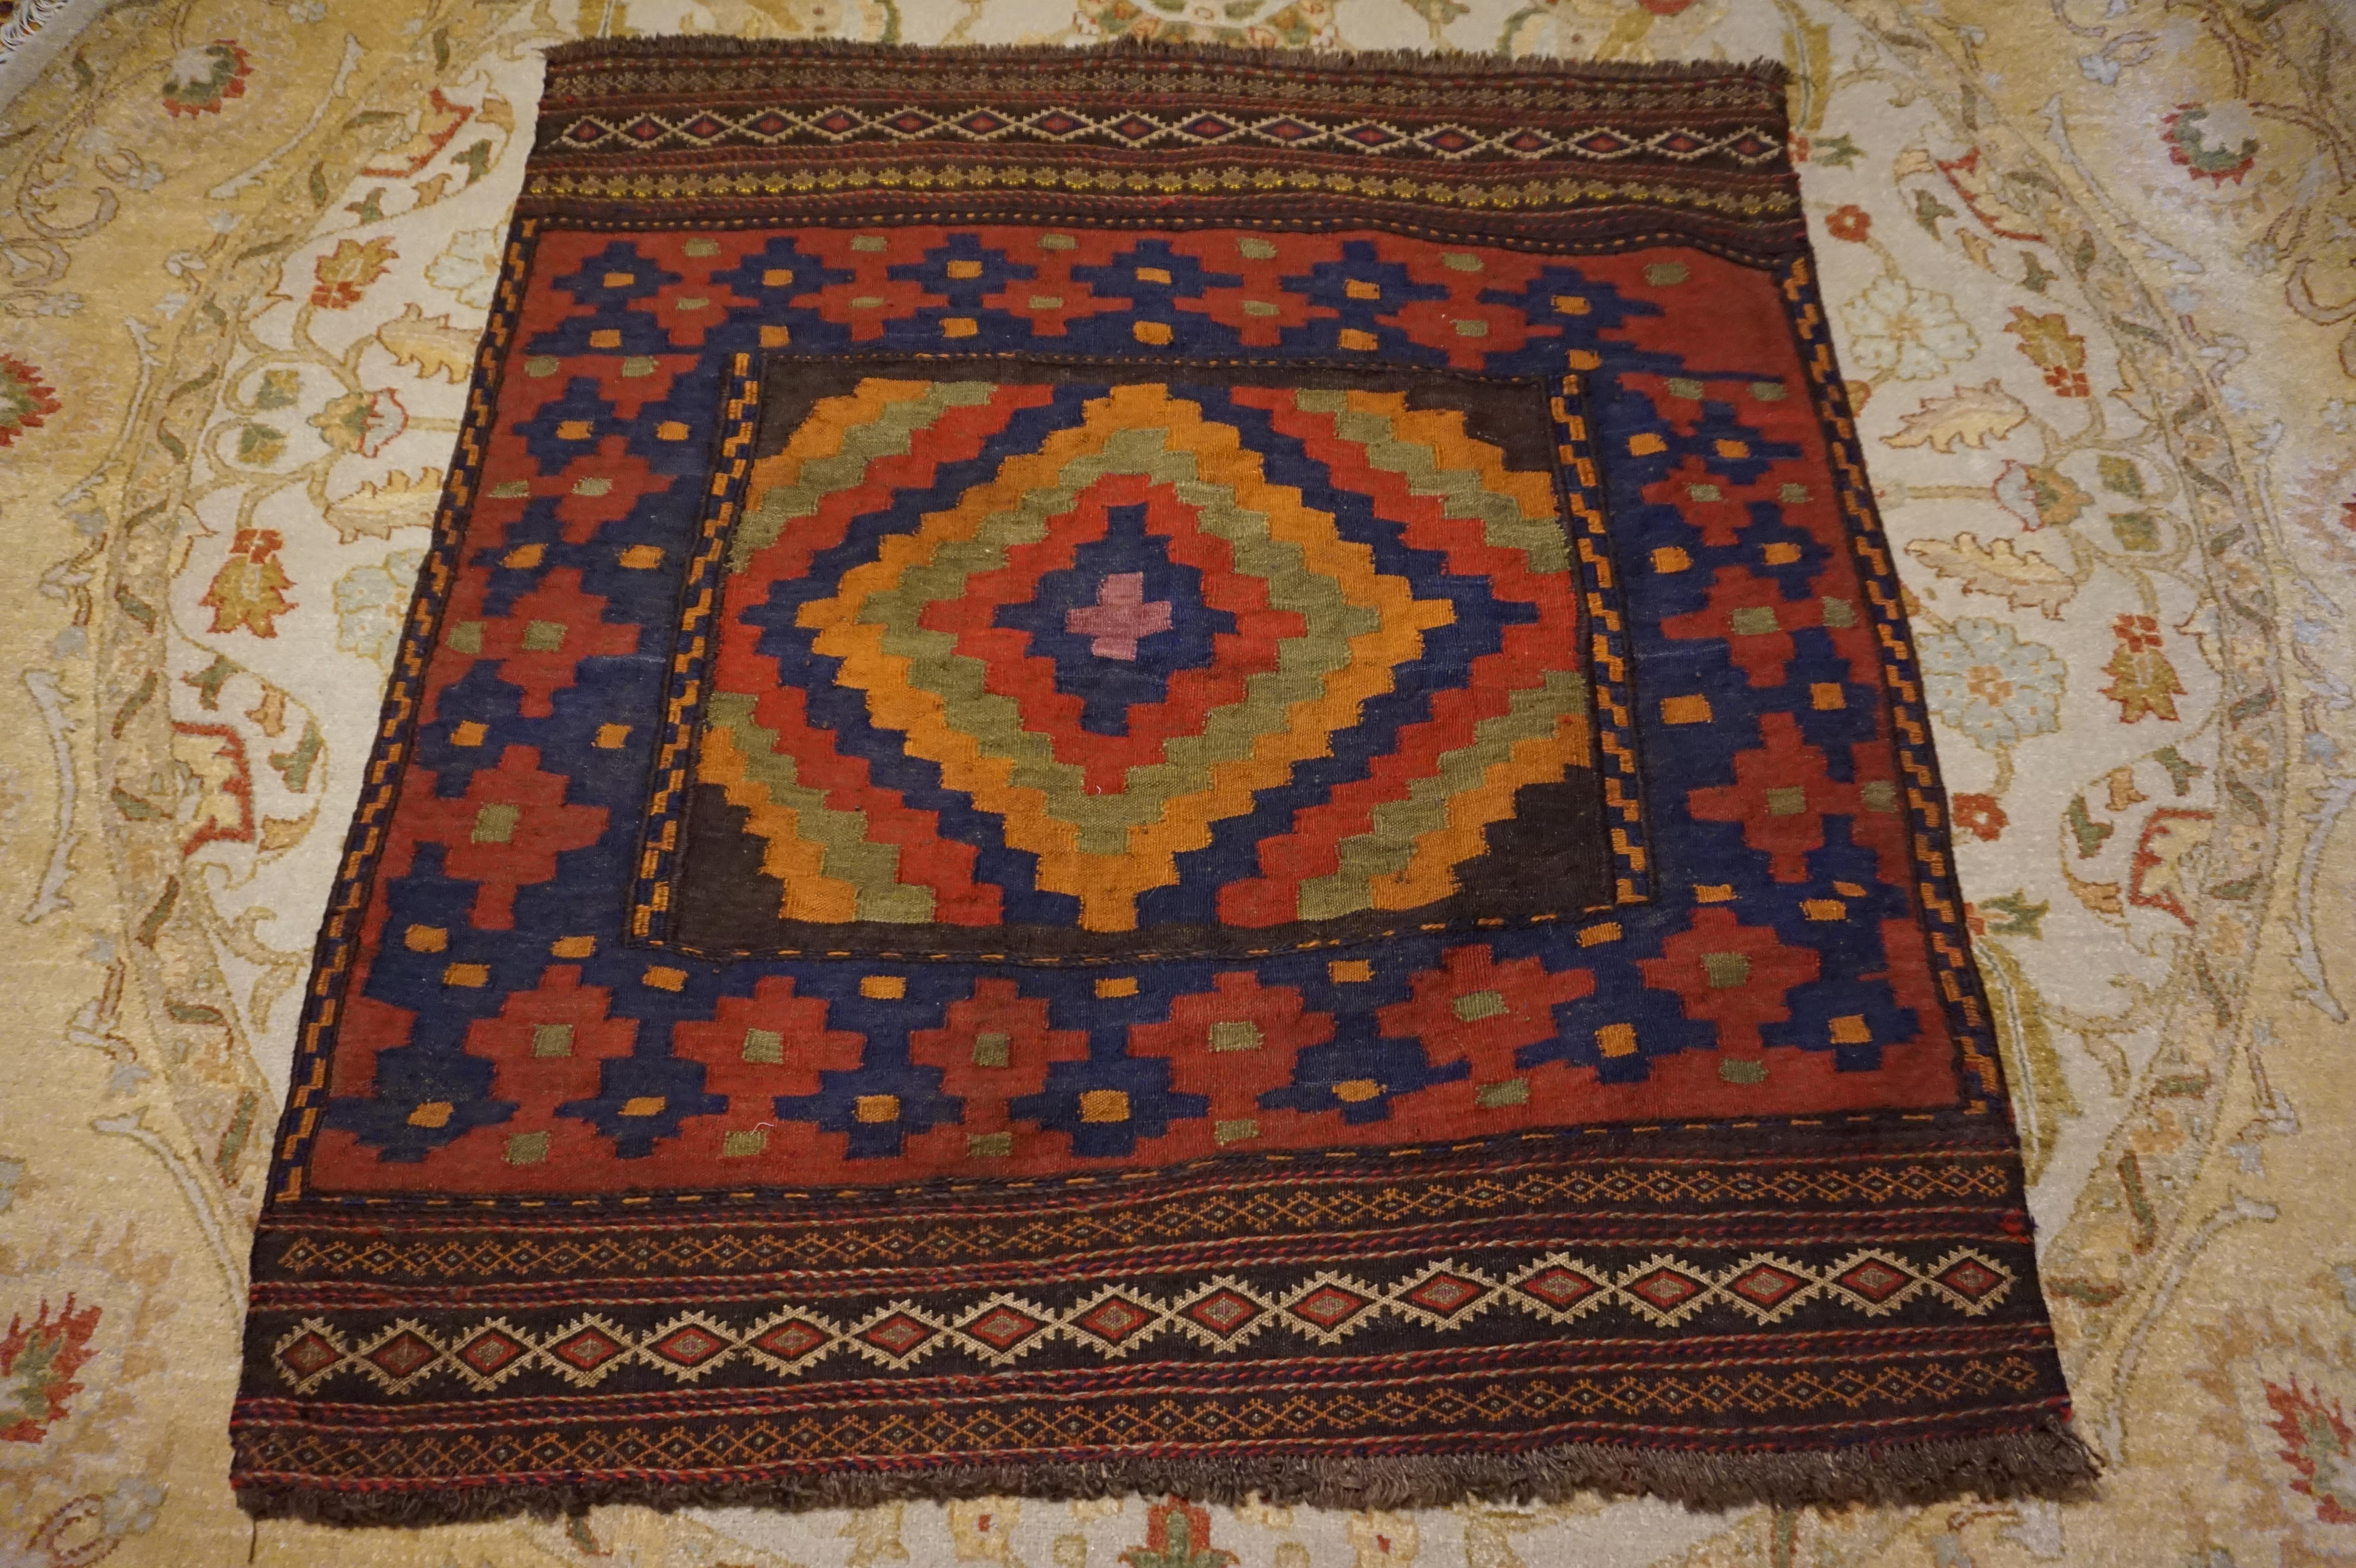 Rare Afghan Kilim with fine border and kite medallion. Excellent hue and impactful pattern. Great warmth and artistry in weave despite compact square size.